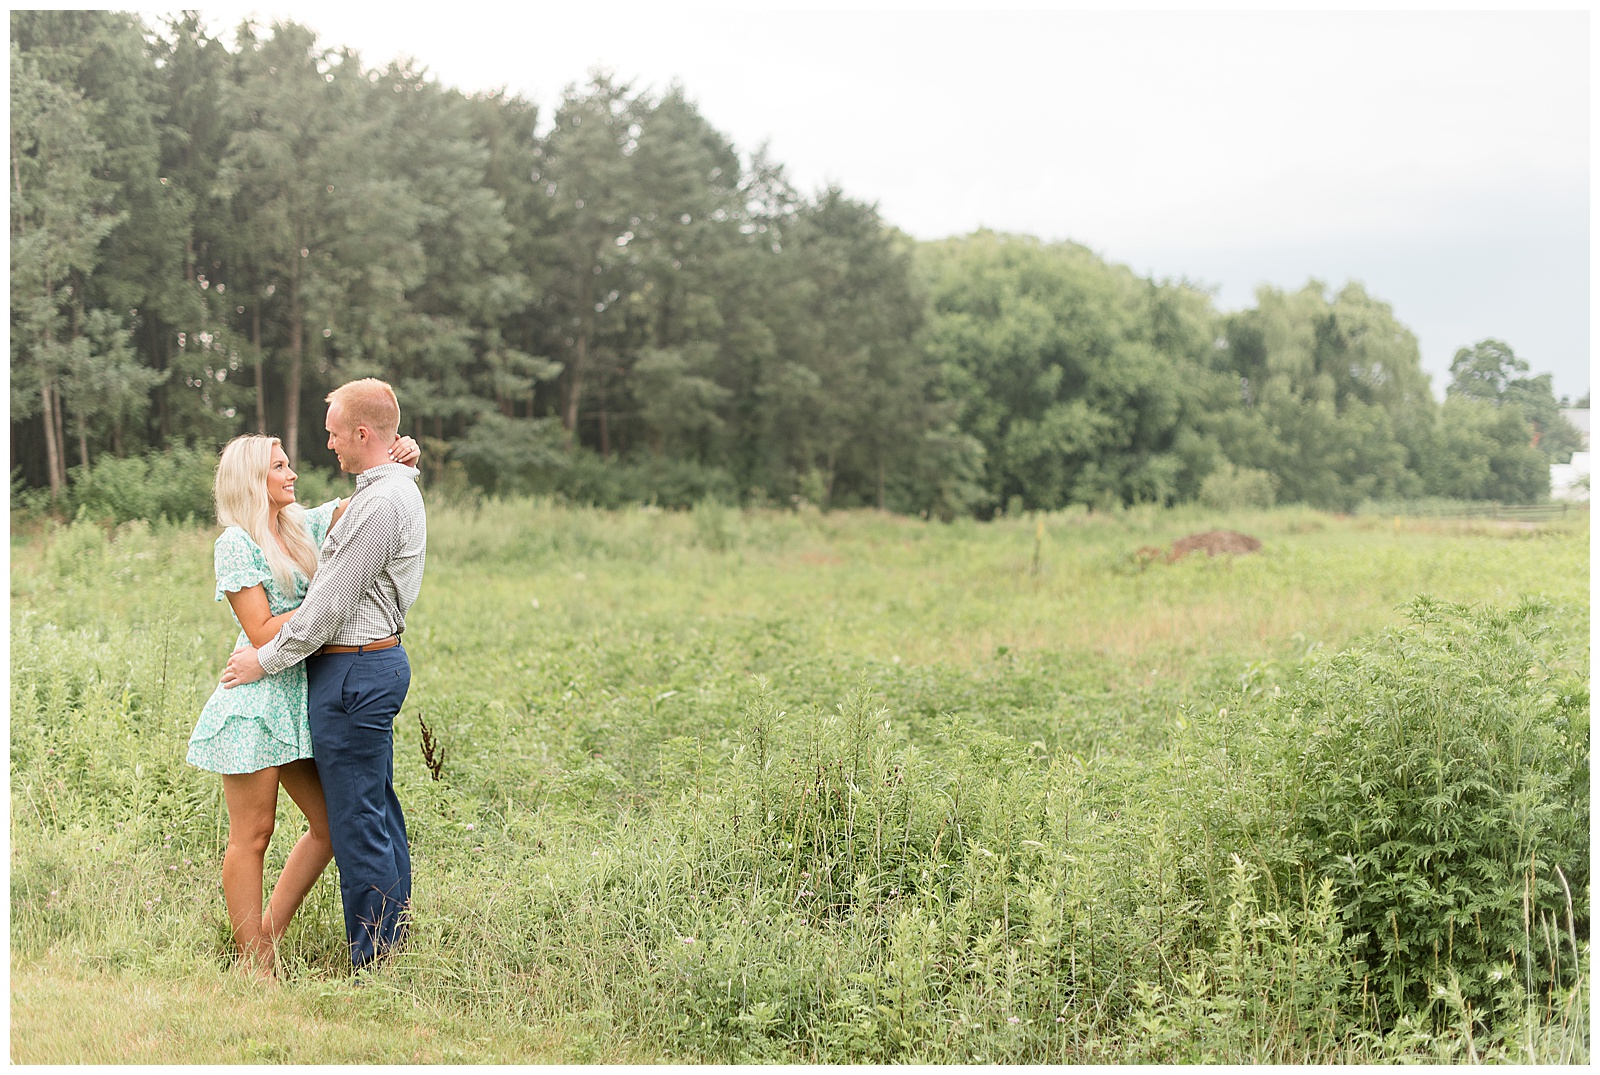 couple standing in olooking at each otherpen grass field 